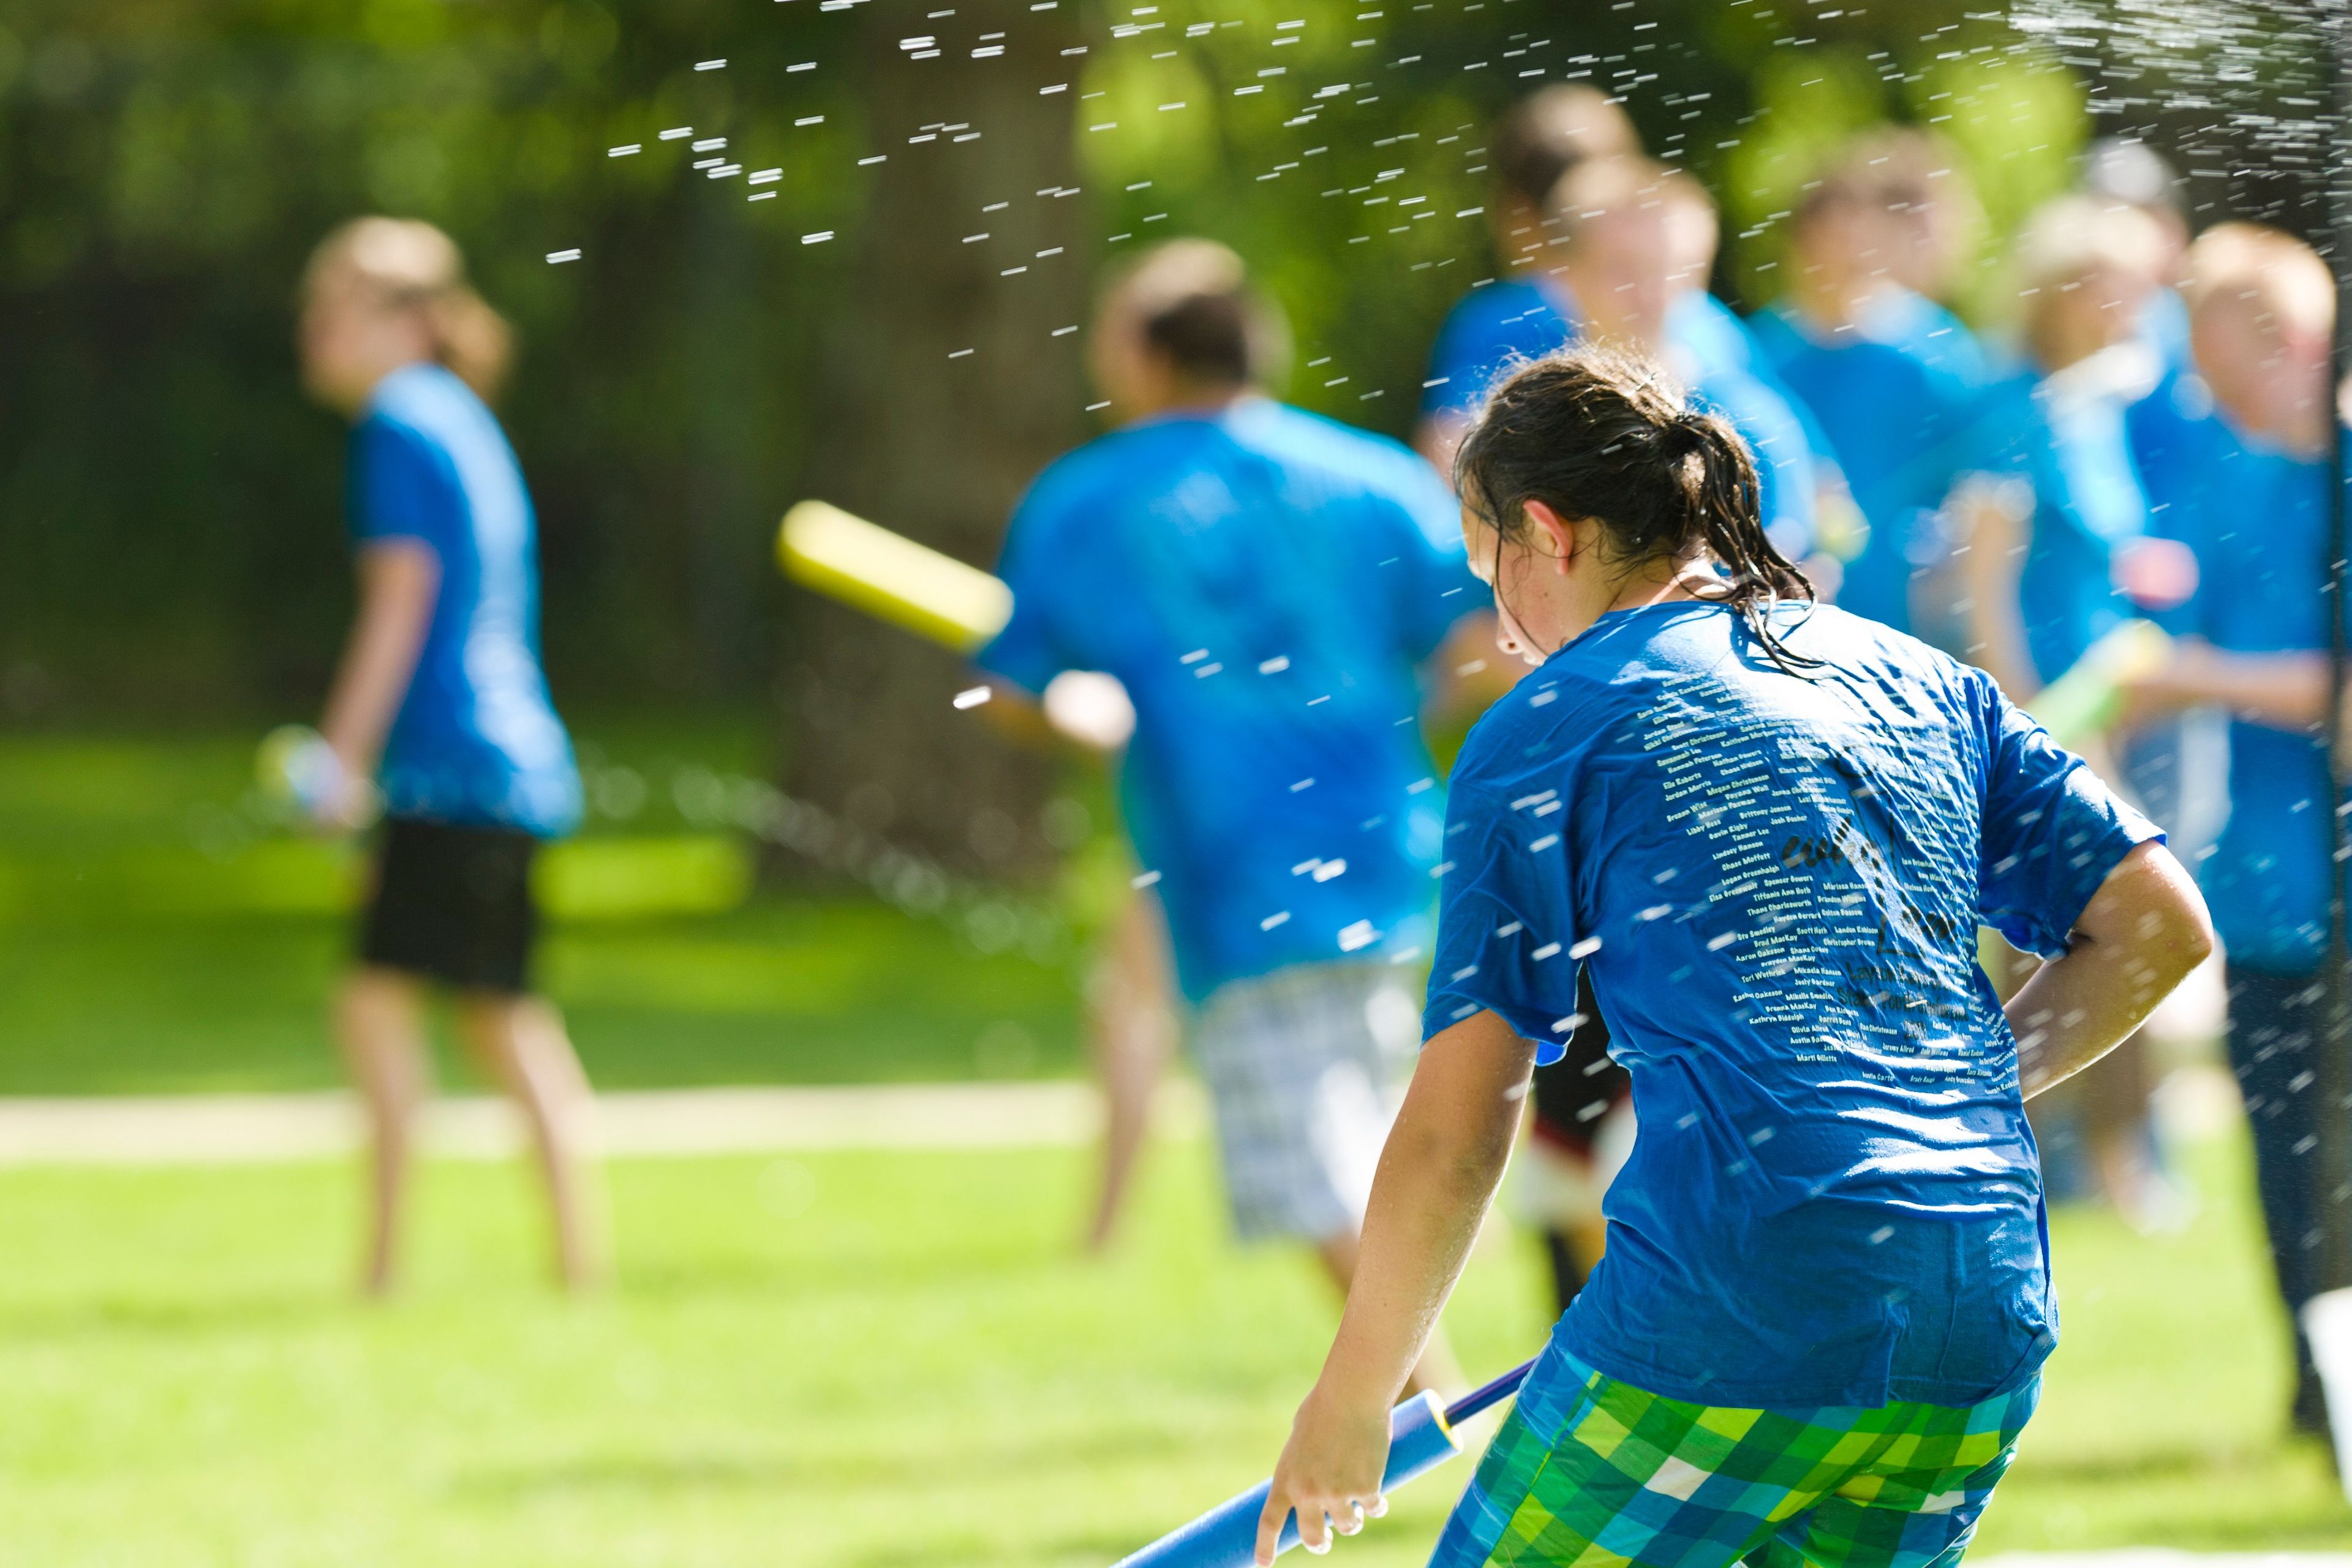 A group of youth play water games outside.  